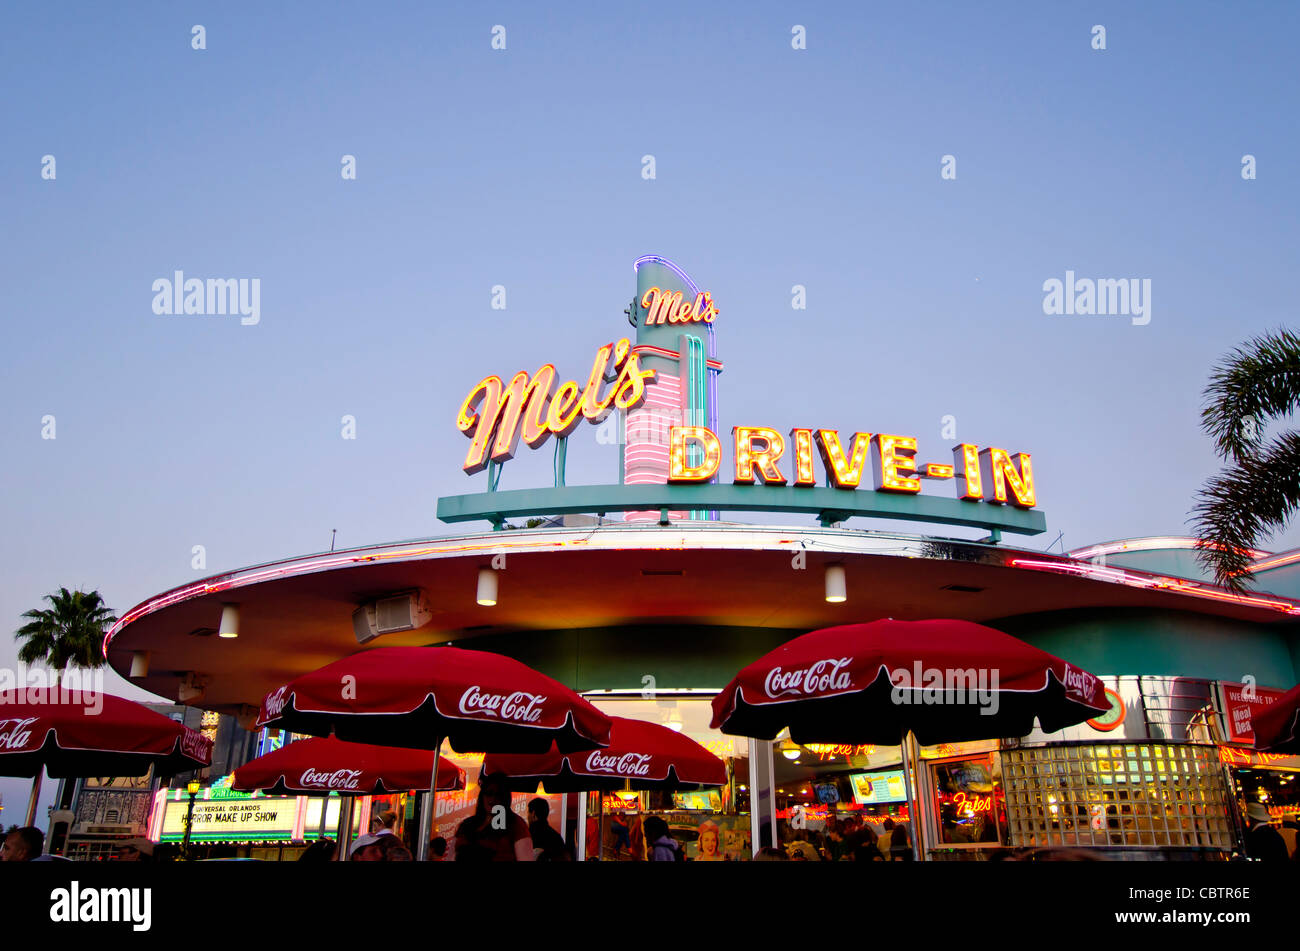 Mel's Drive-In restaurant with diners outdoors at twilight Universal Studios Orlando, Florida. Stock Photo